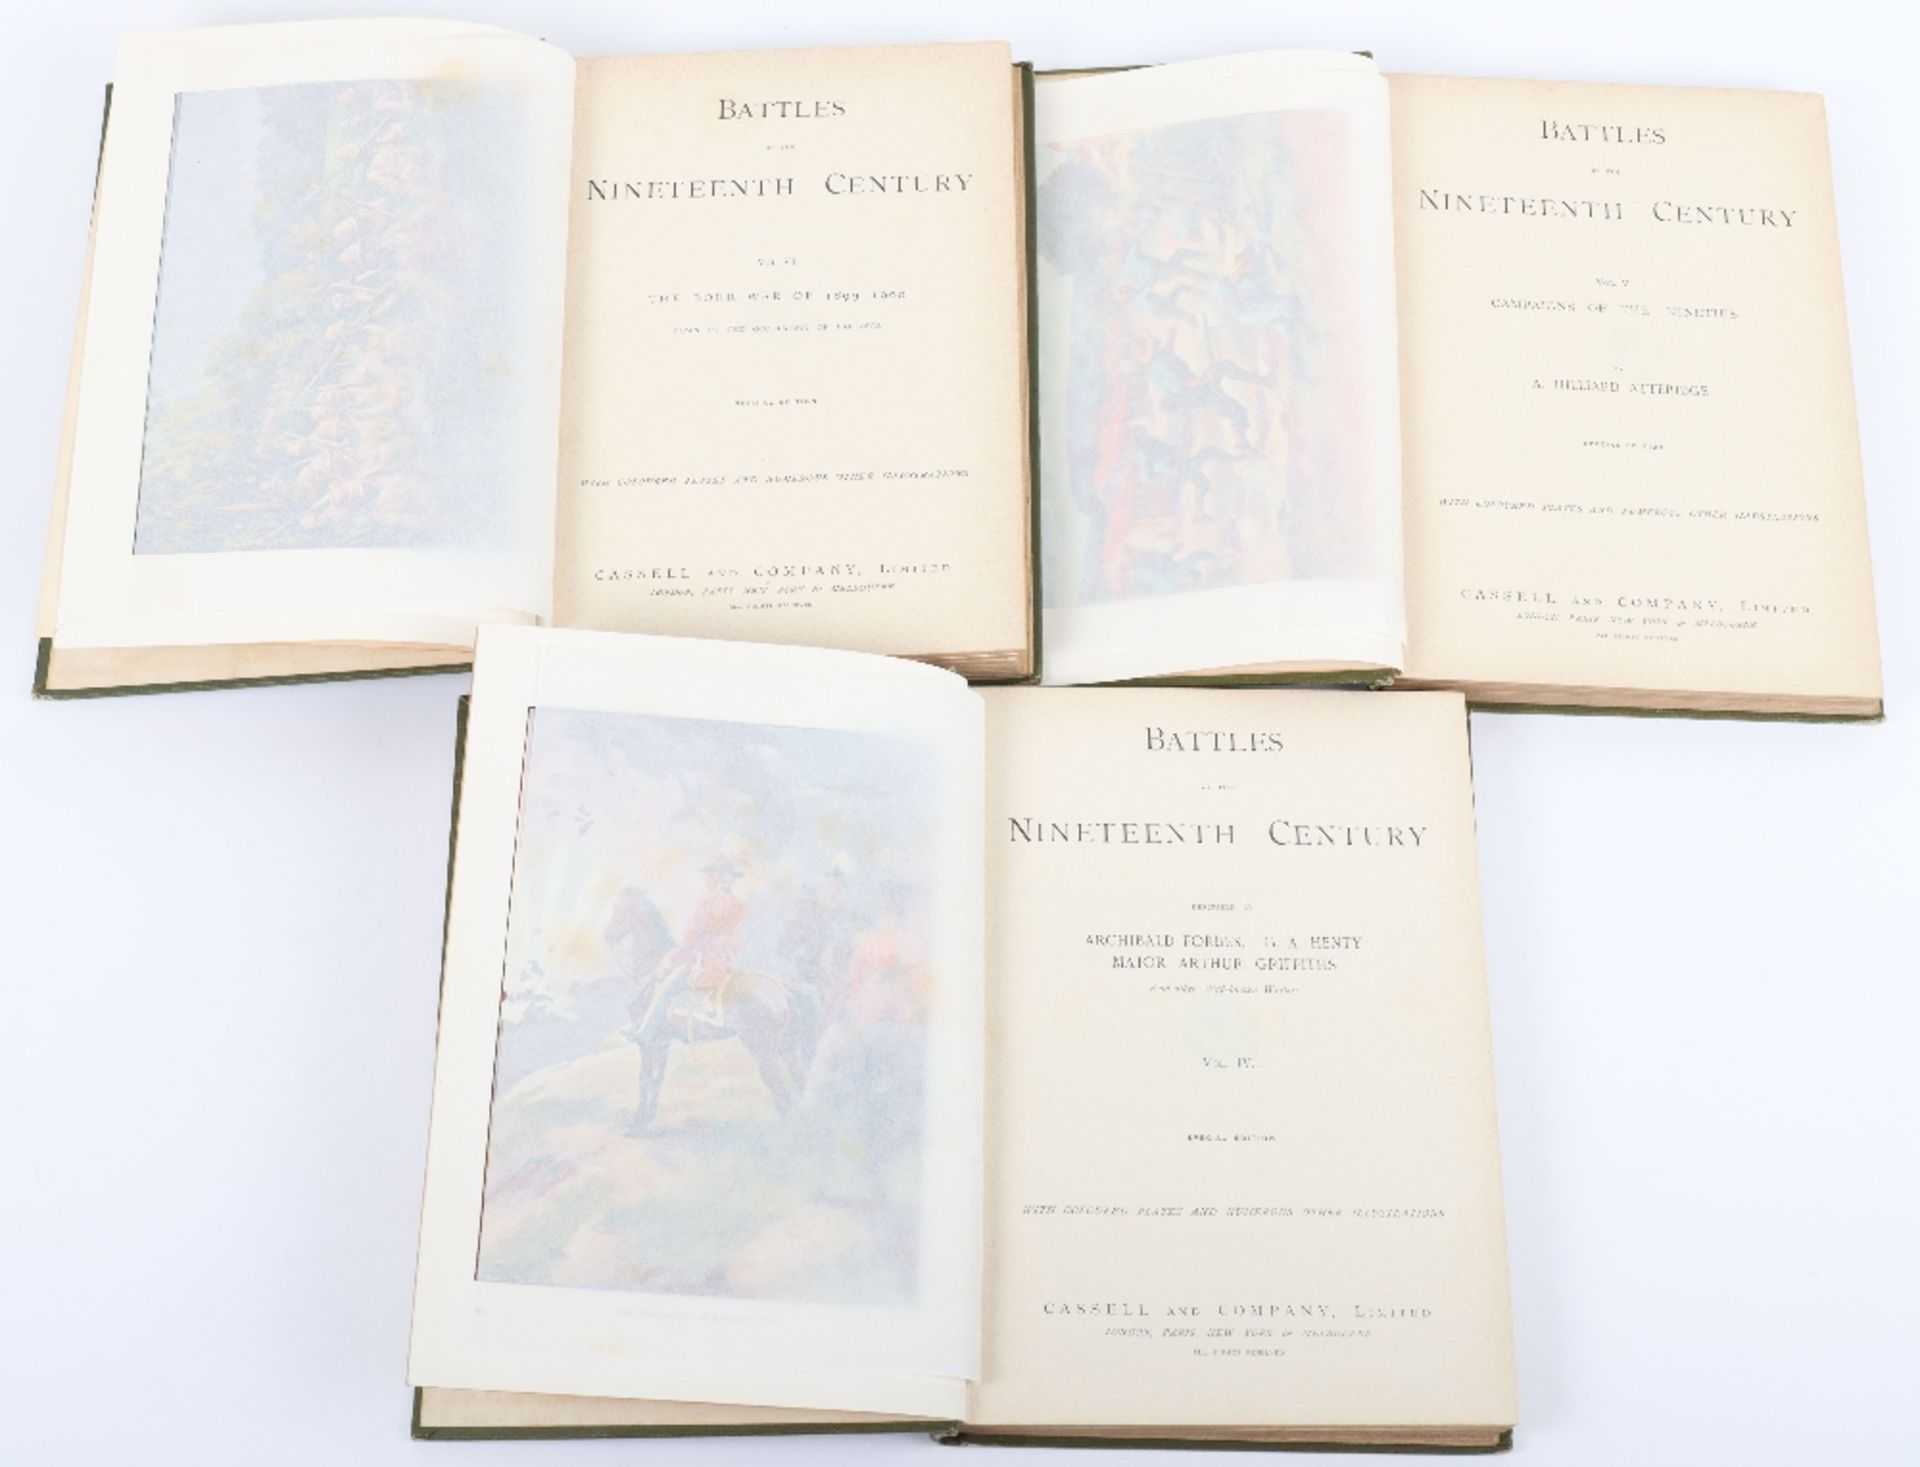 Archibald Forbes, Battles of the Nineteenth Century Volumes 1-VI - Image 4 of 4